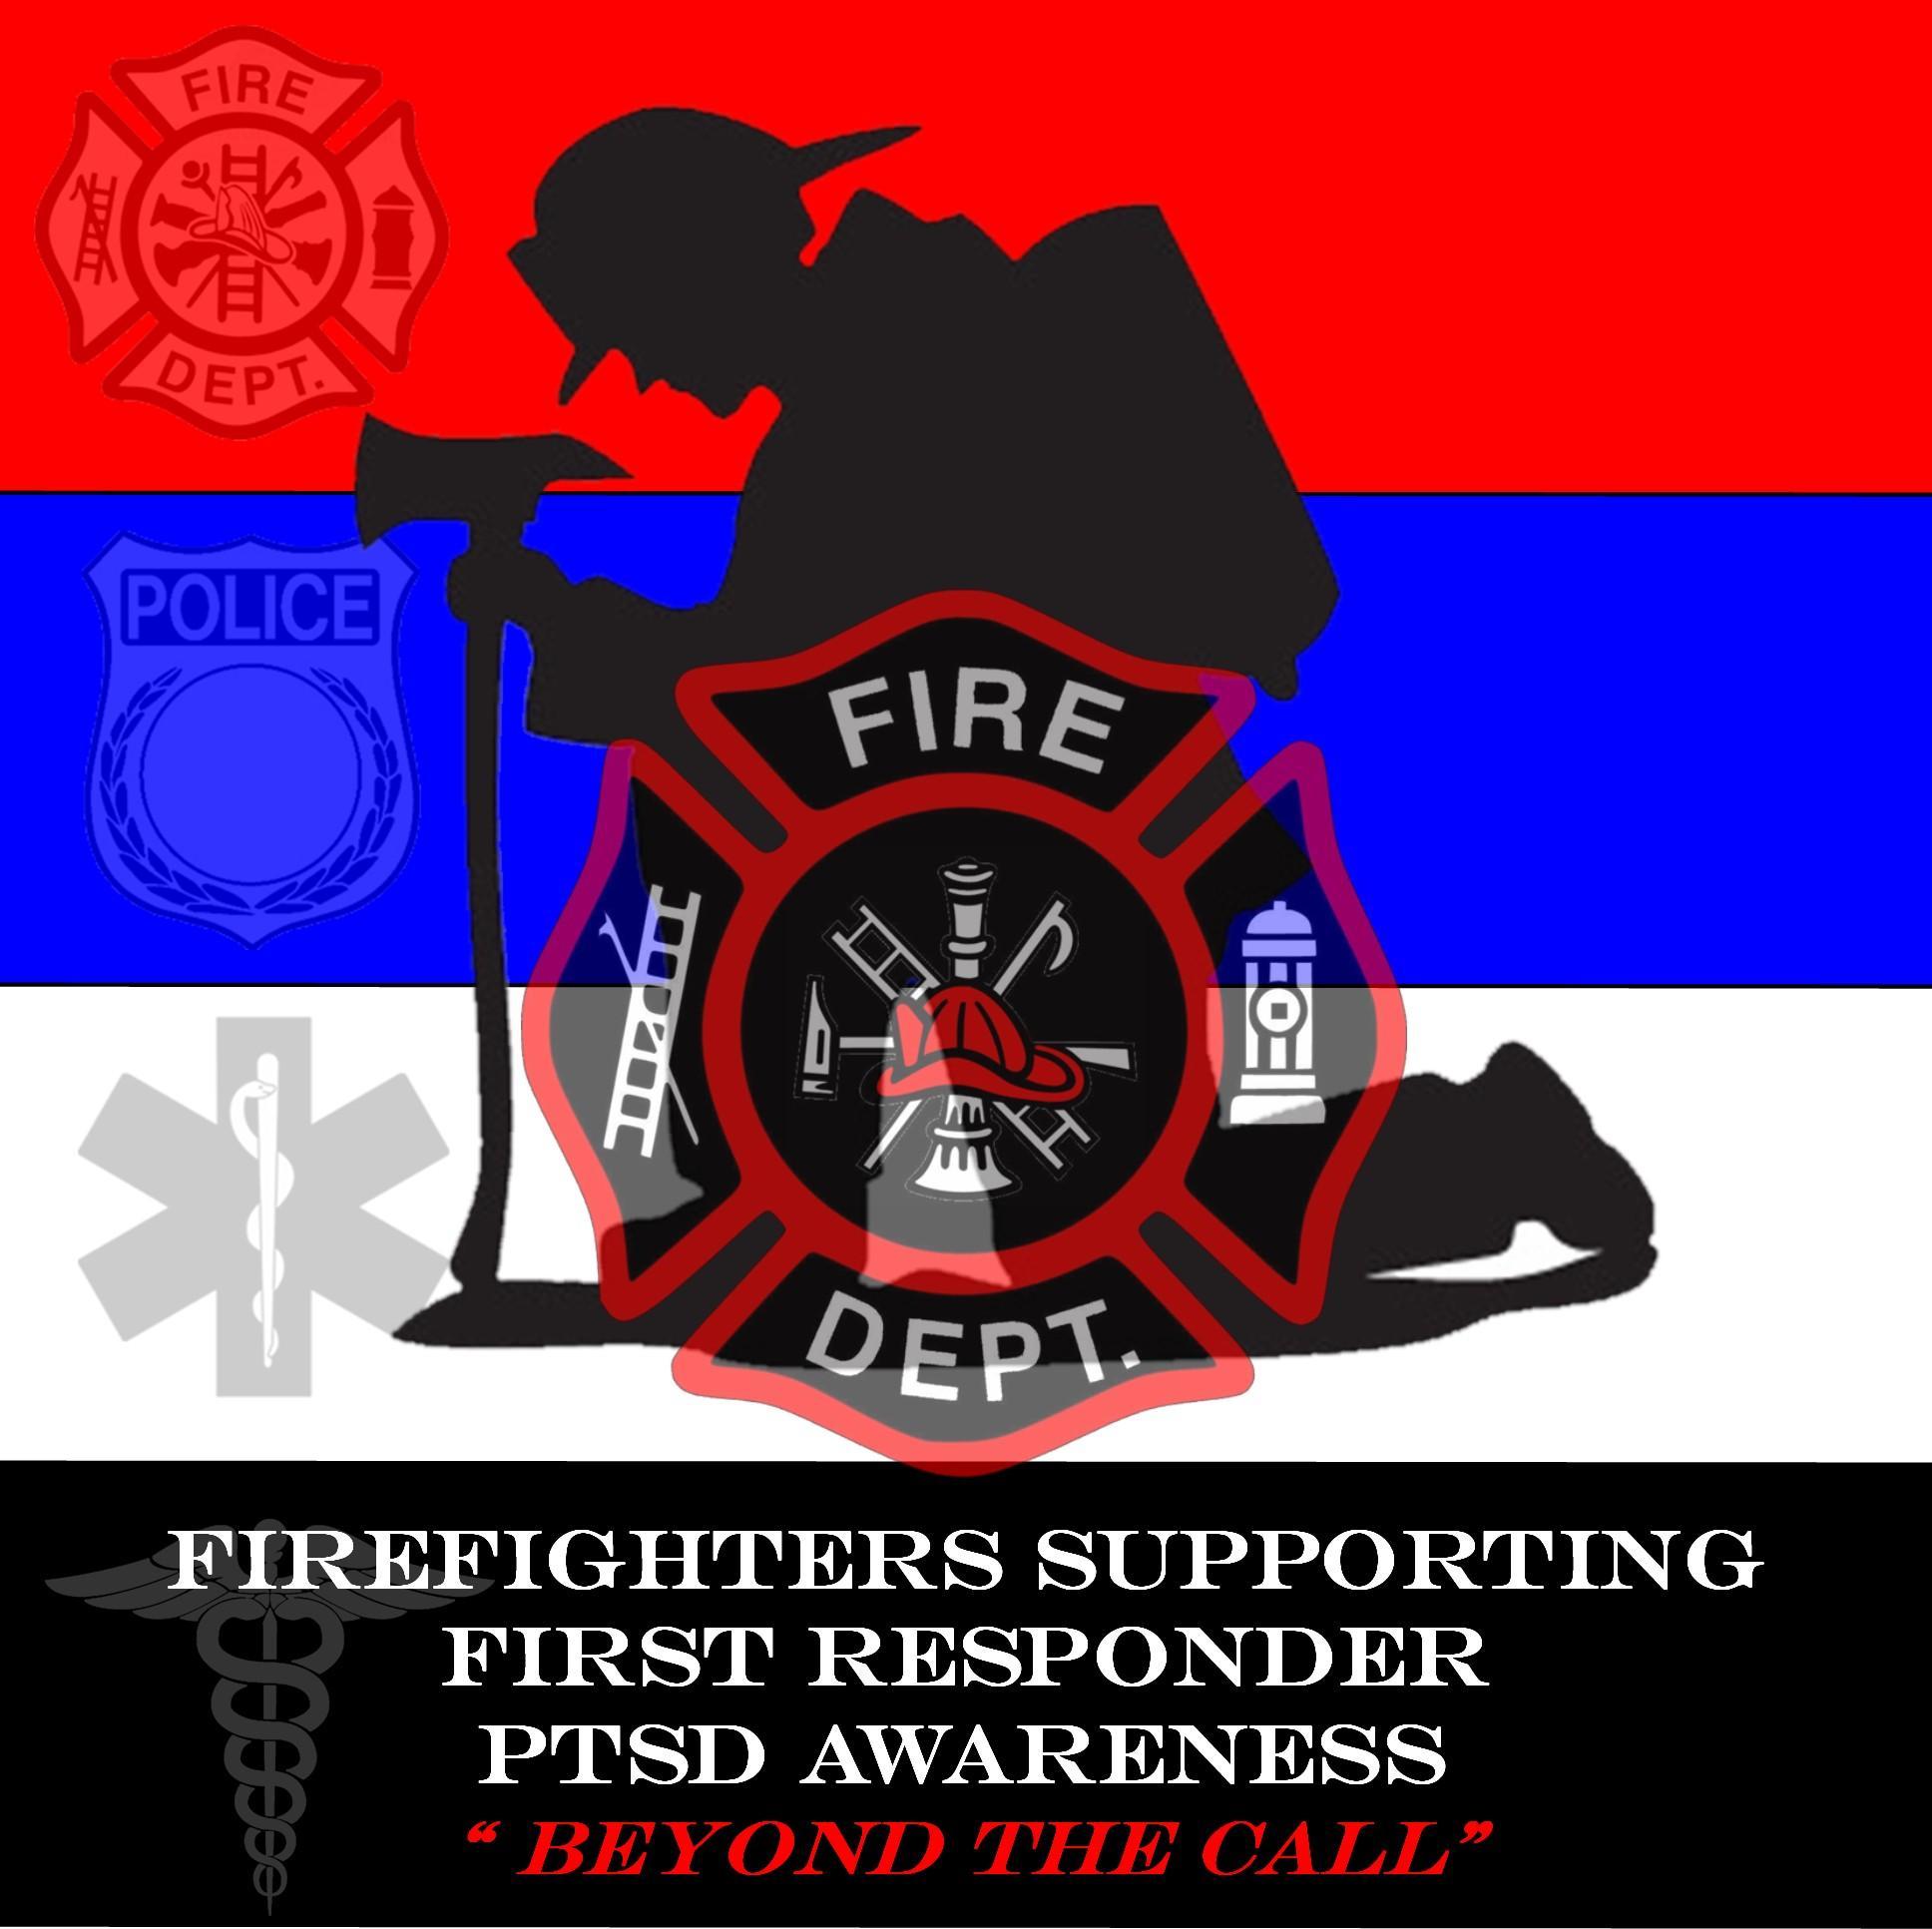 Beyond The Call  , Firefighters supporting all first responders with PTSD awareness.